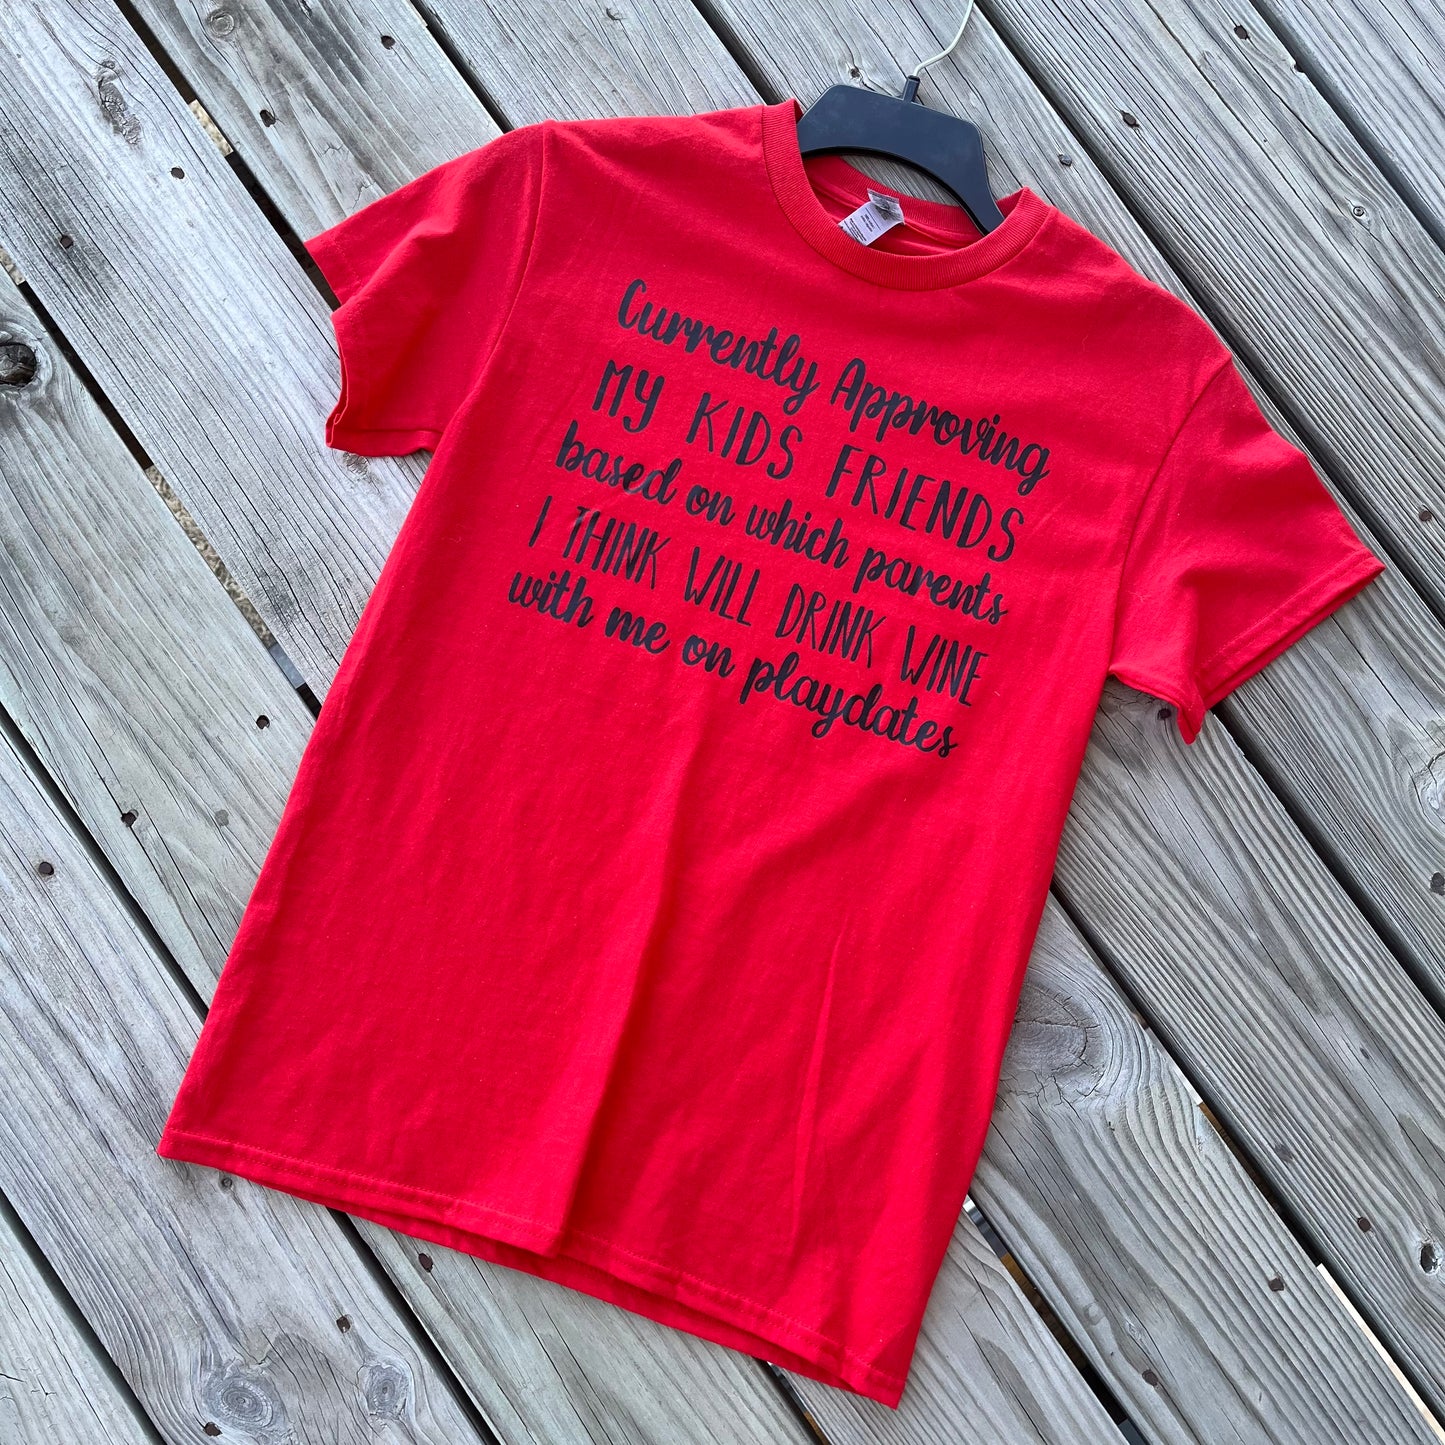 "Currently Approving My Kids Friends..." Graphic Tee